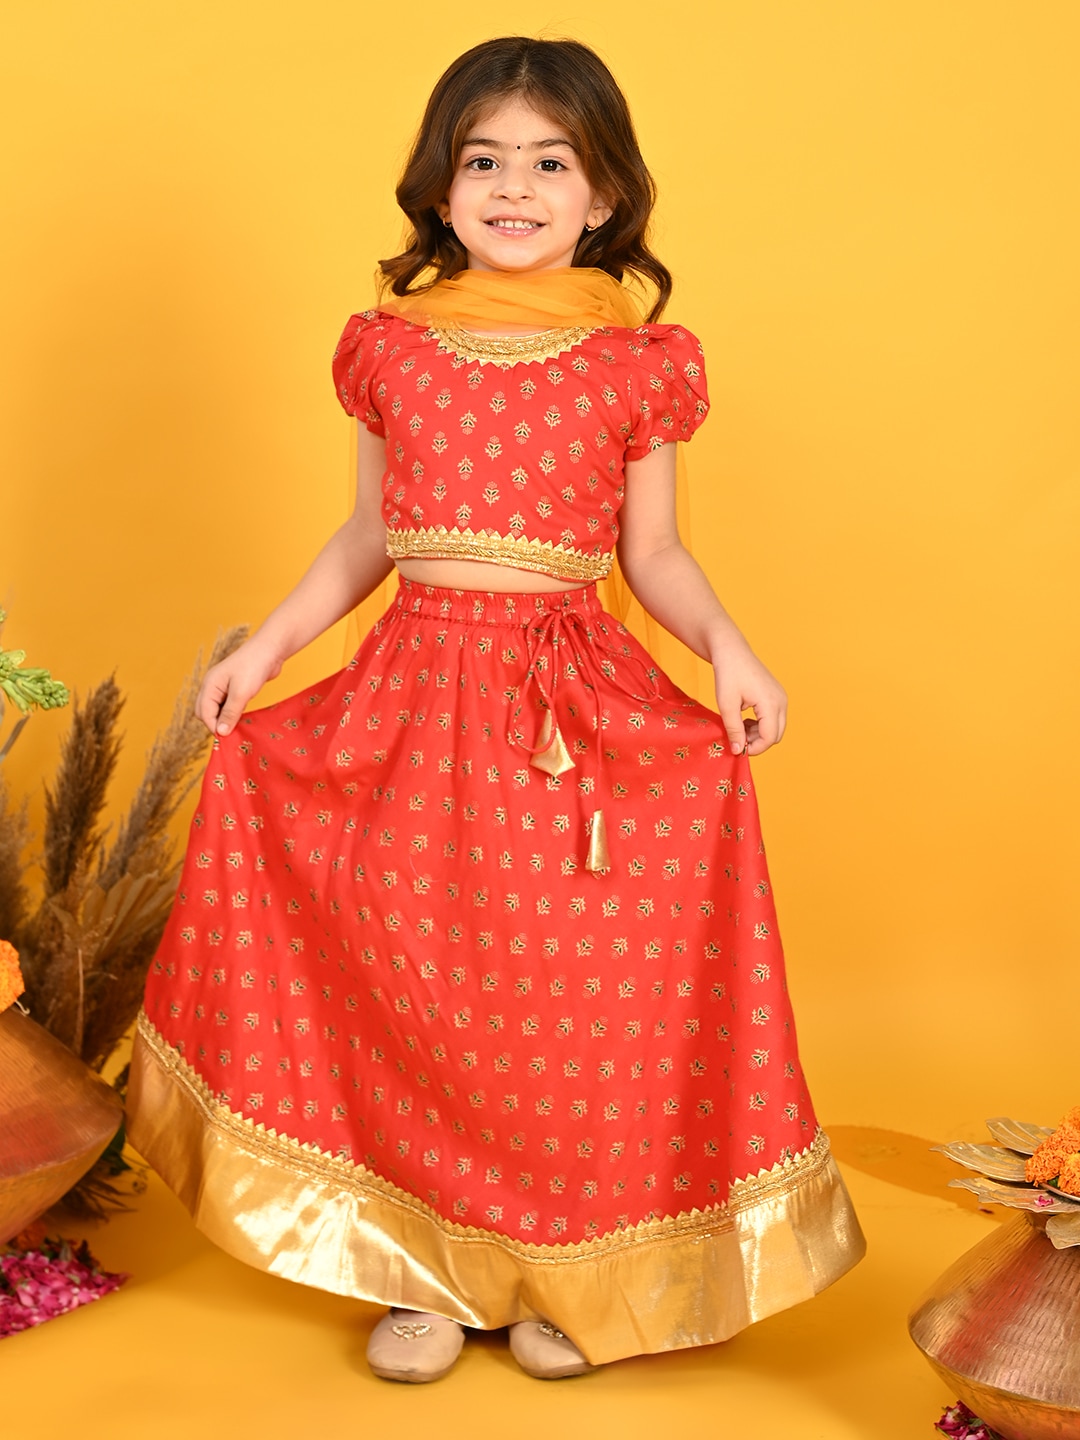 Buy Saka Designs Sleeveless Choli and Lehenga Set with Lace Border Dupatta  Floral Glitter Print Yellow for Girls (7-8Years) Online in India, Shop at  FirstCry.com - 14954990